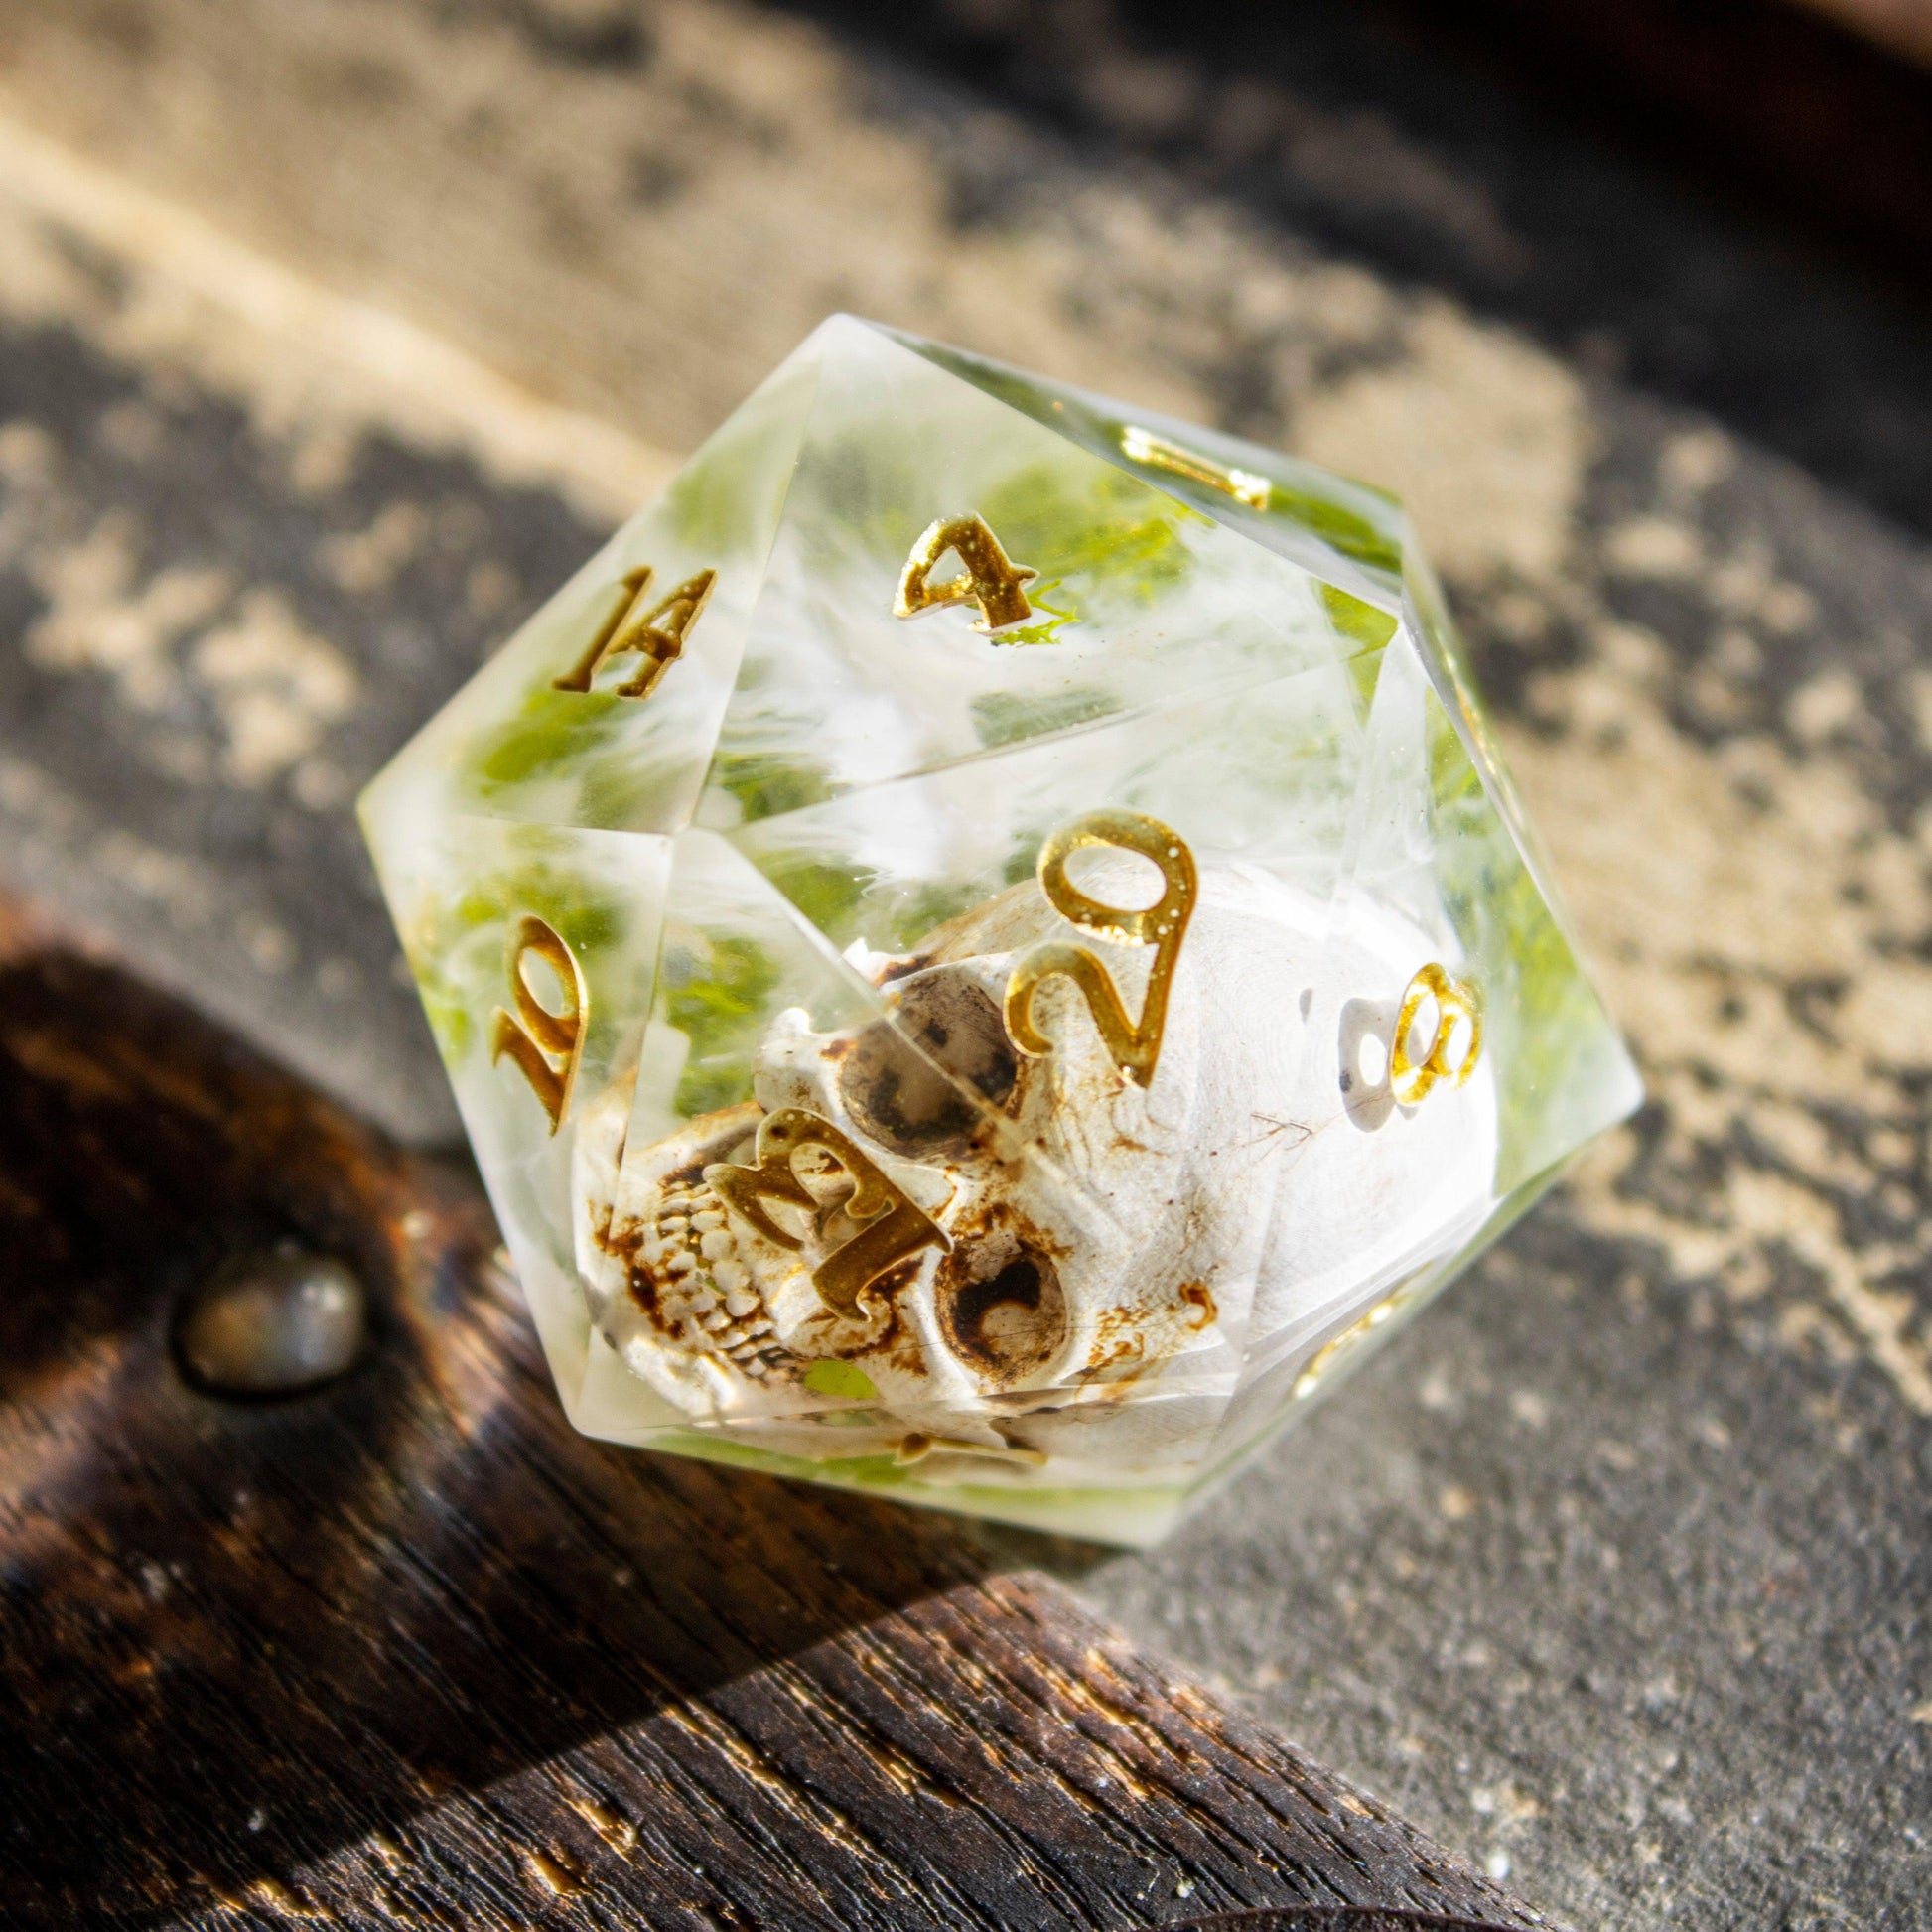 The Honored Grave - Humble Dragon Dice